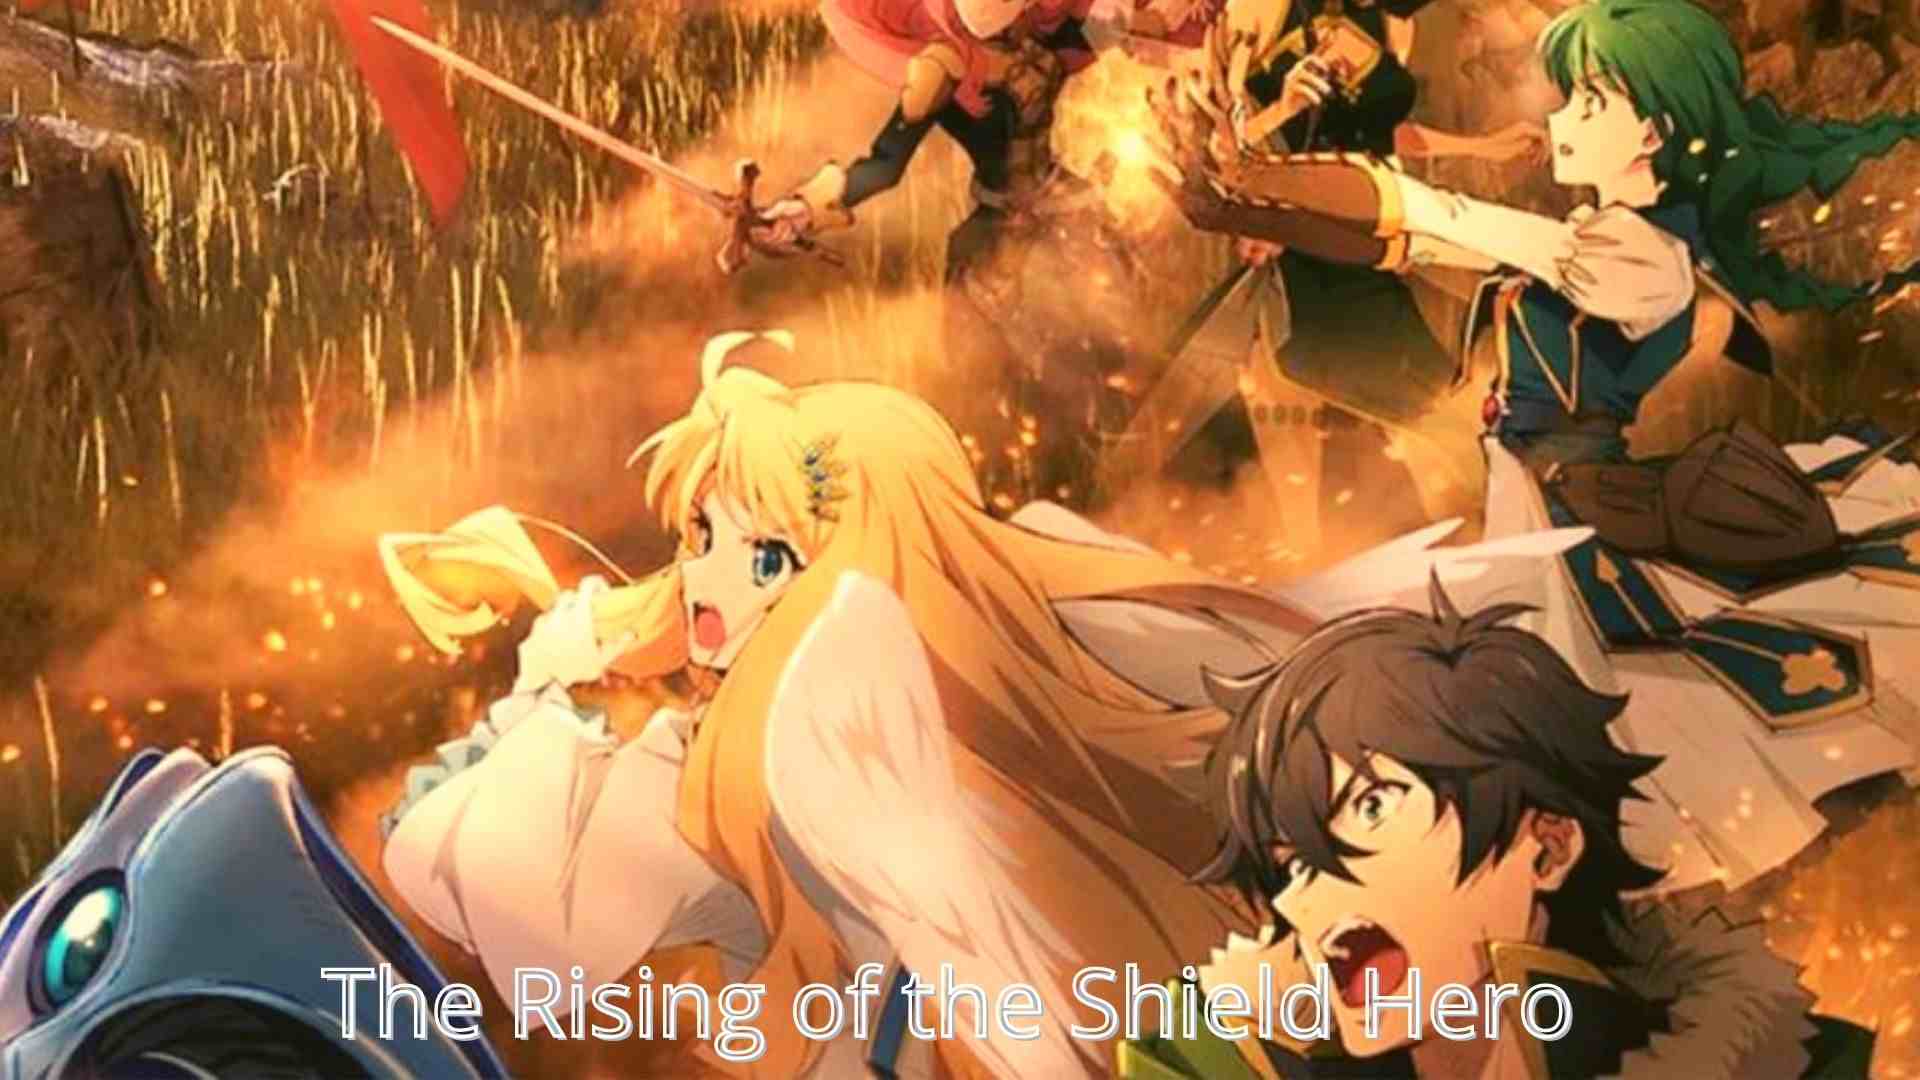 The Rising of the Shield Hero Producer, Writer, and Director